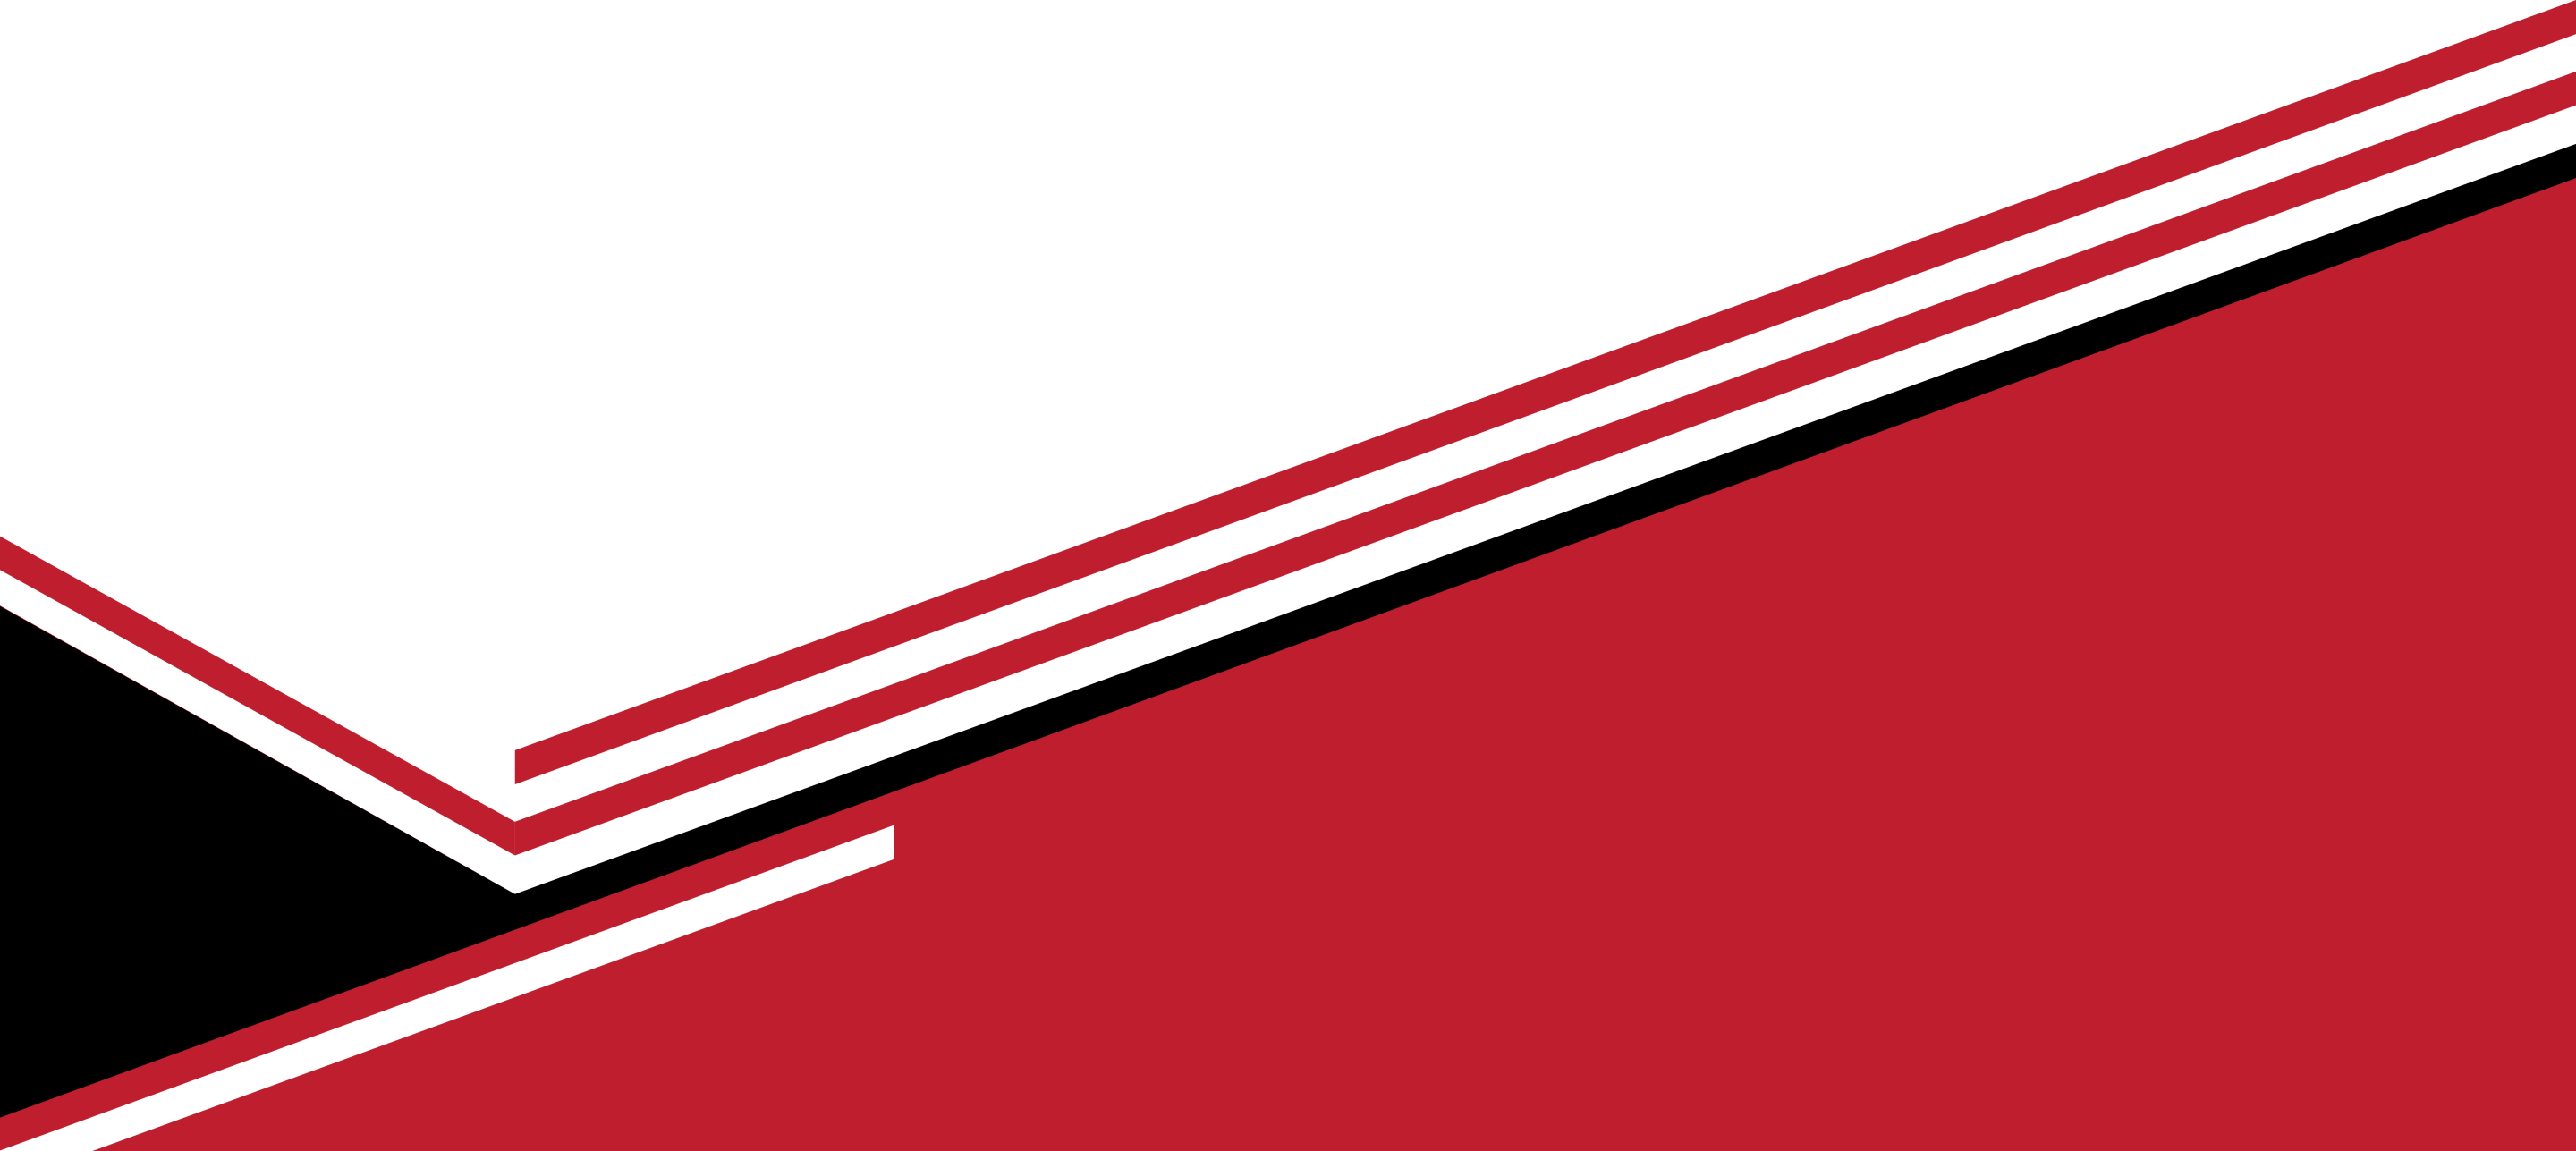 Abstract Red HQ Image Free PNG Image